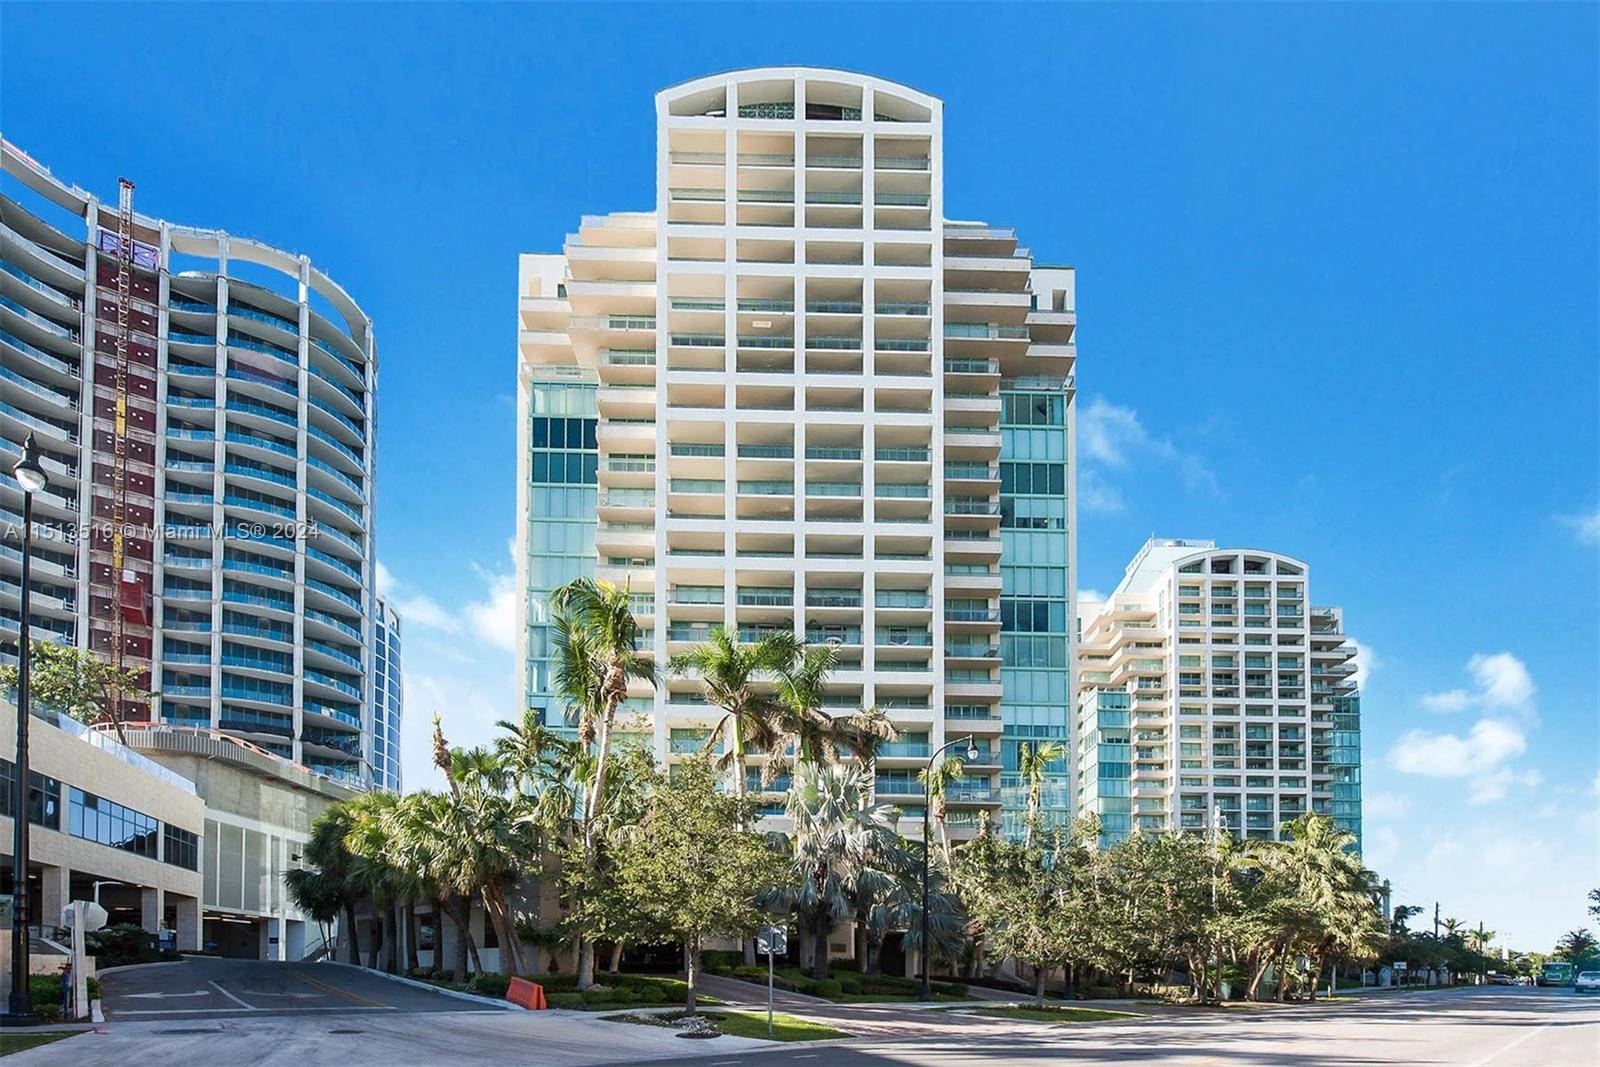 Introducing an exquisite two bedroom, two bath condo nestled within the prestigious Ritz Carlton in the enchanting Village of Coconut Grove.